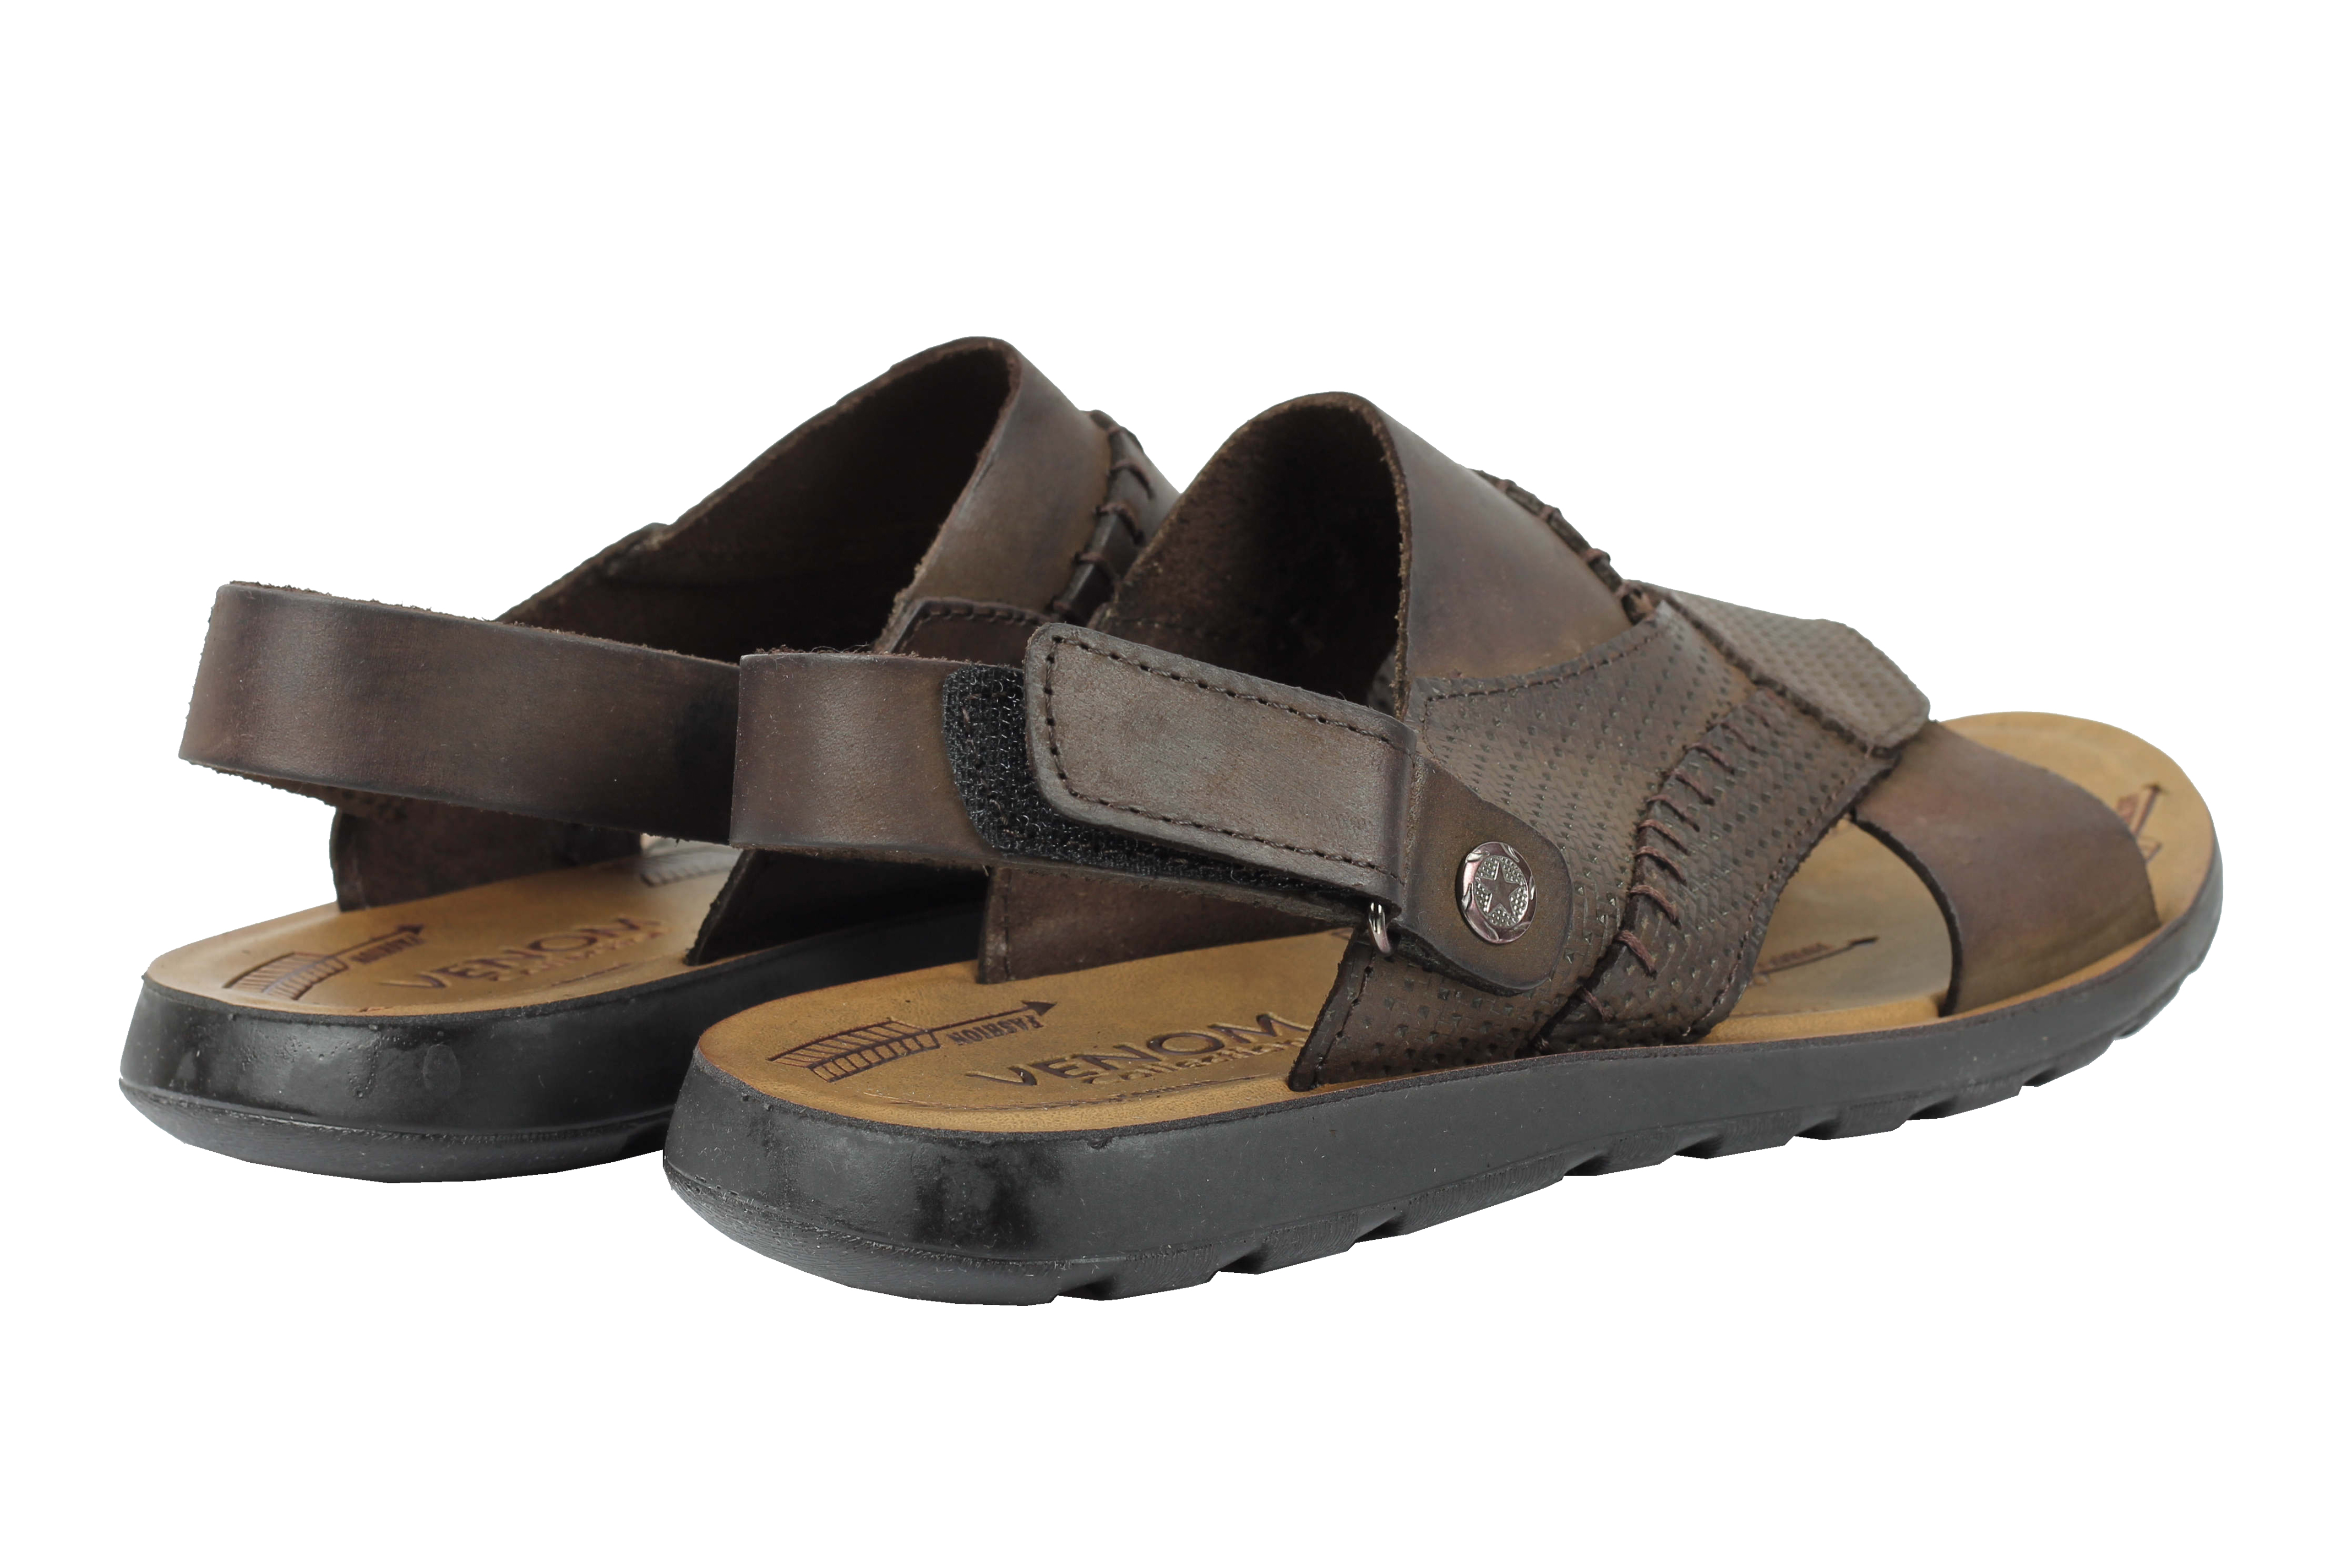 Mens Real Leather Walking Sandals Black Brown Beach Mules Size 6 7 8 9 10 11 